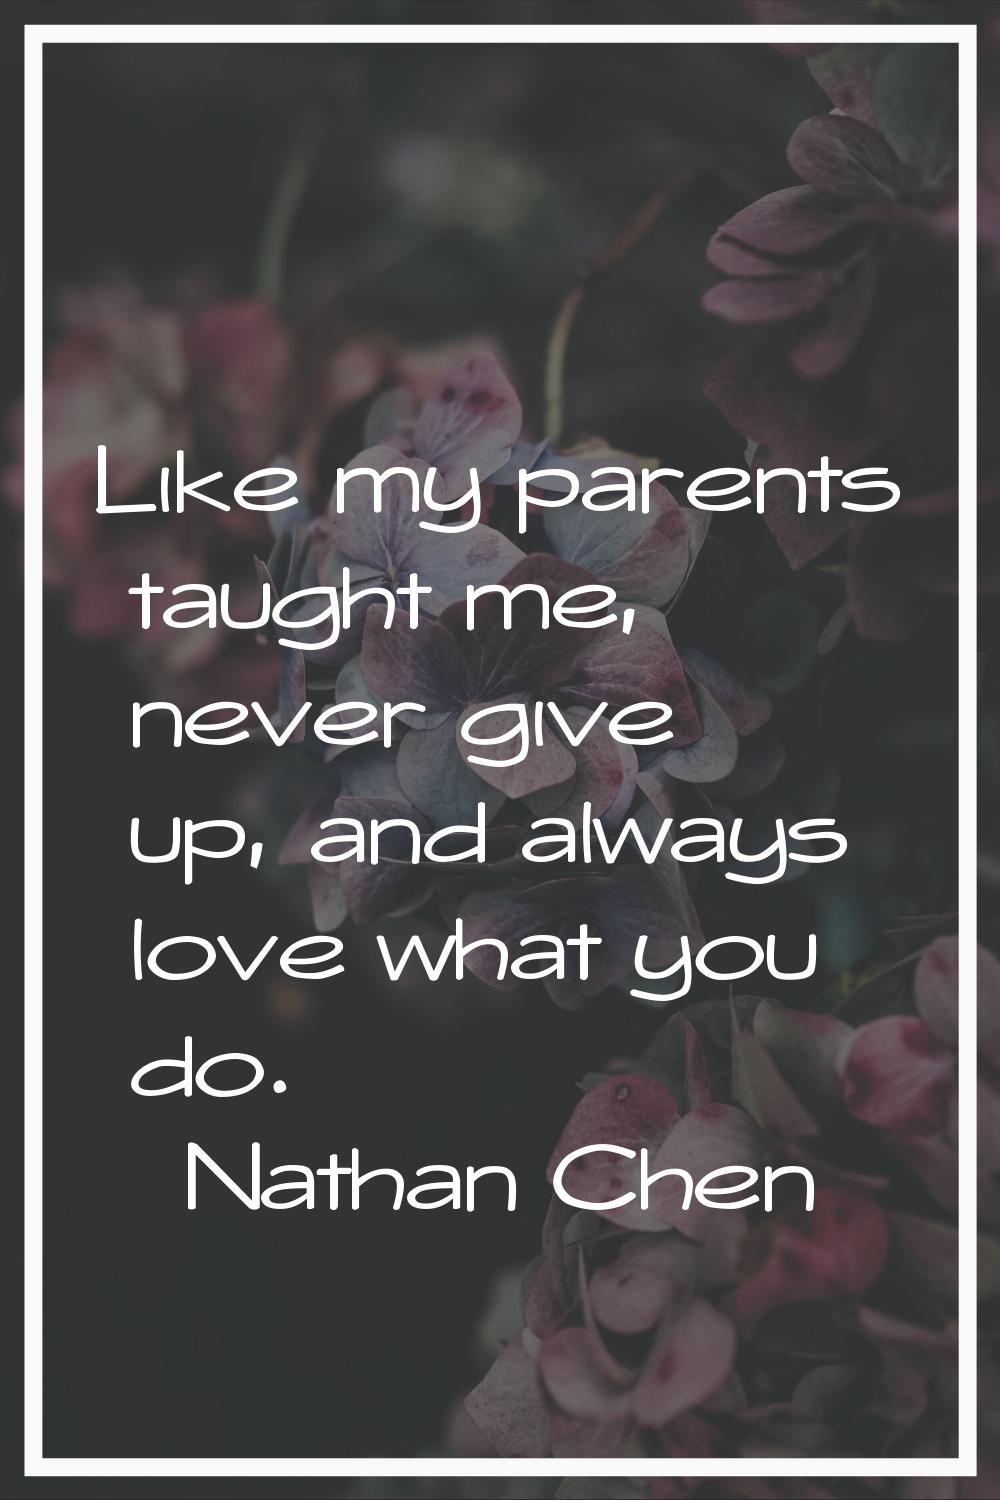 Like my parents taught me, never give up, and always love what you do.